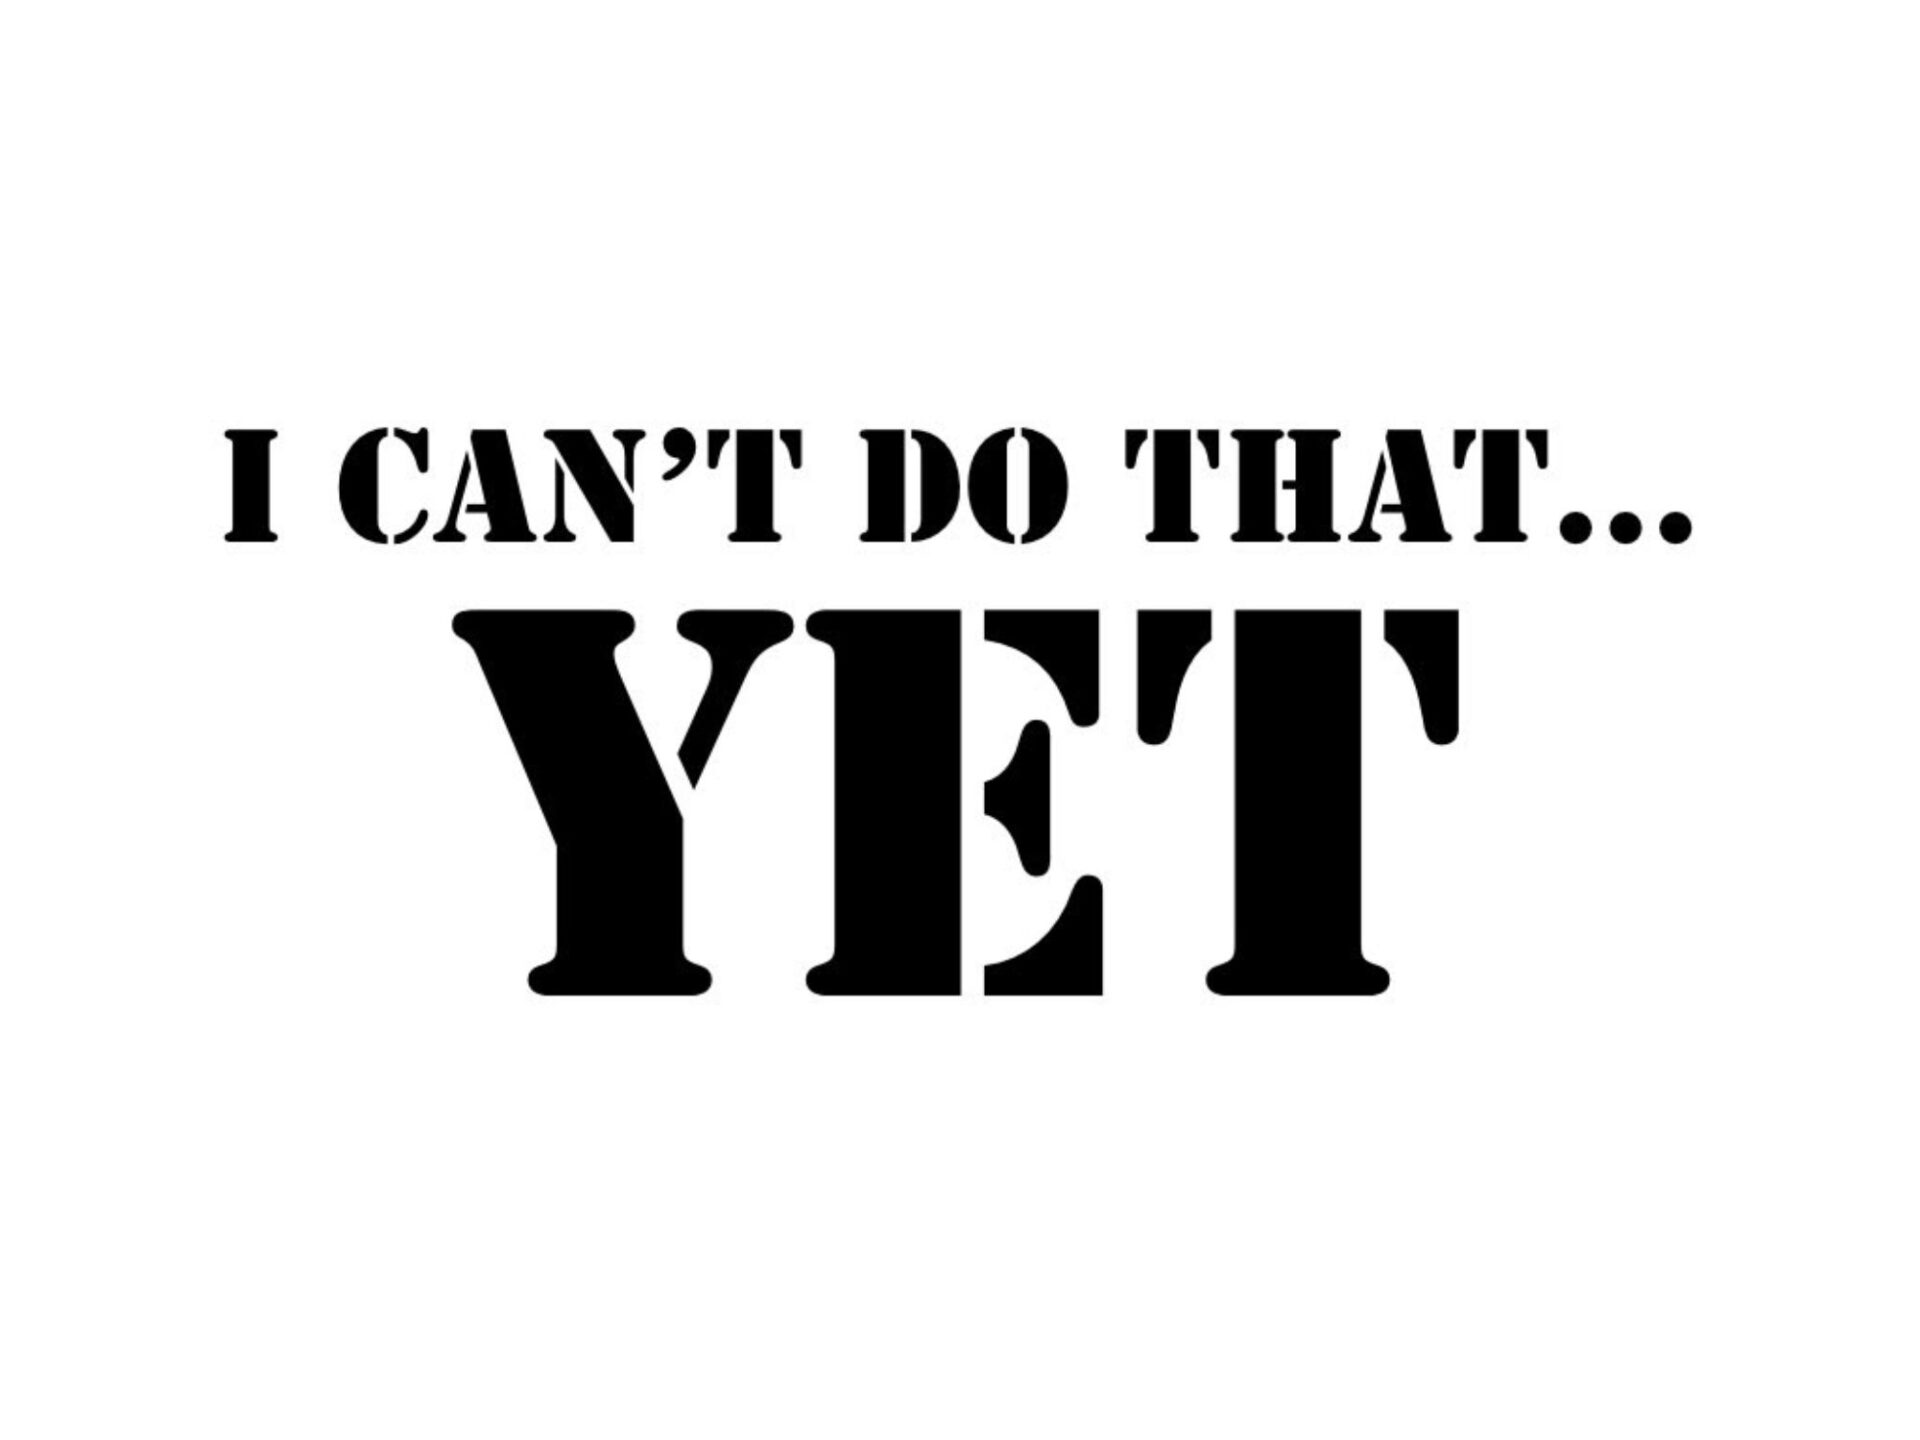 Growth Mindset PART 2: The Power of Yet